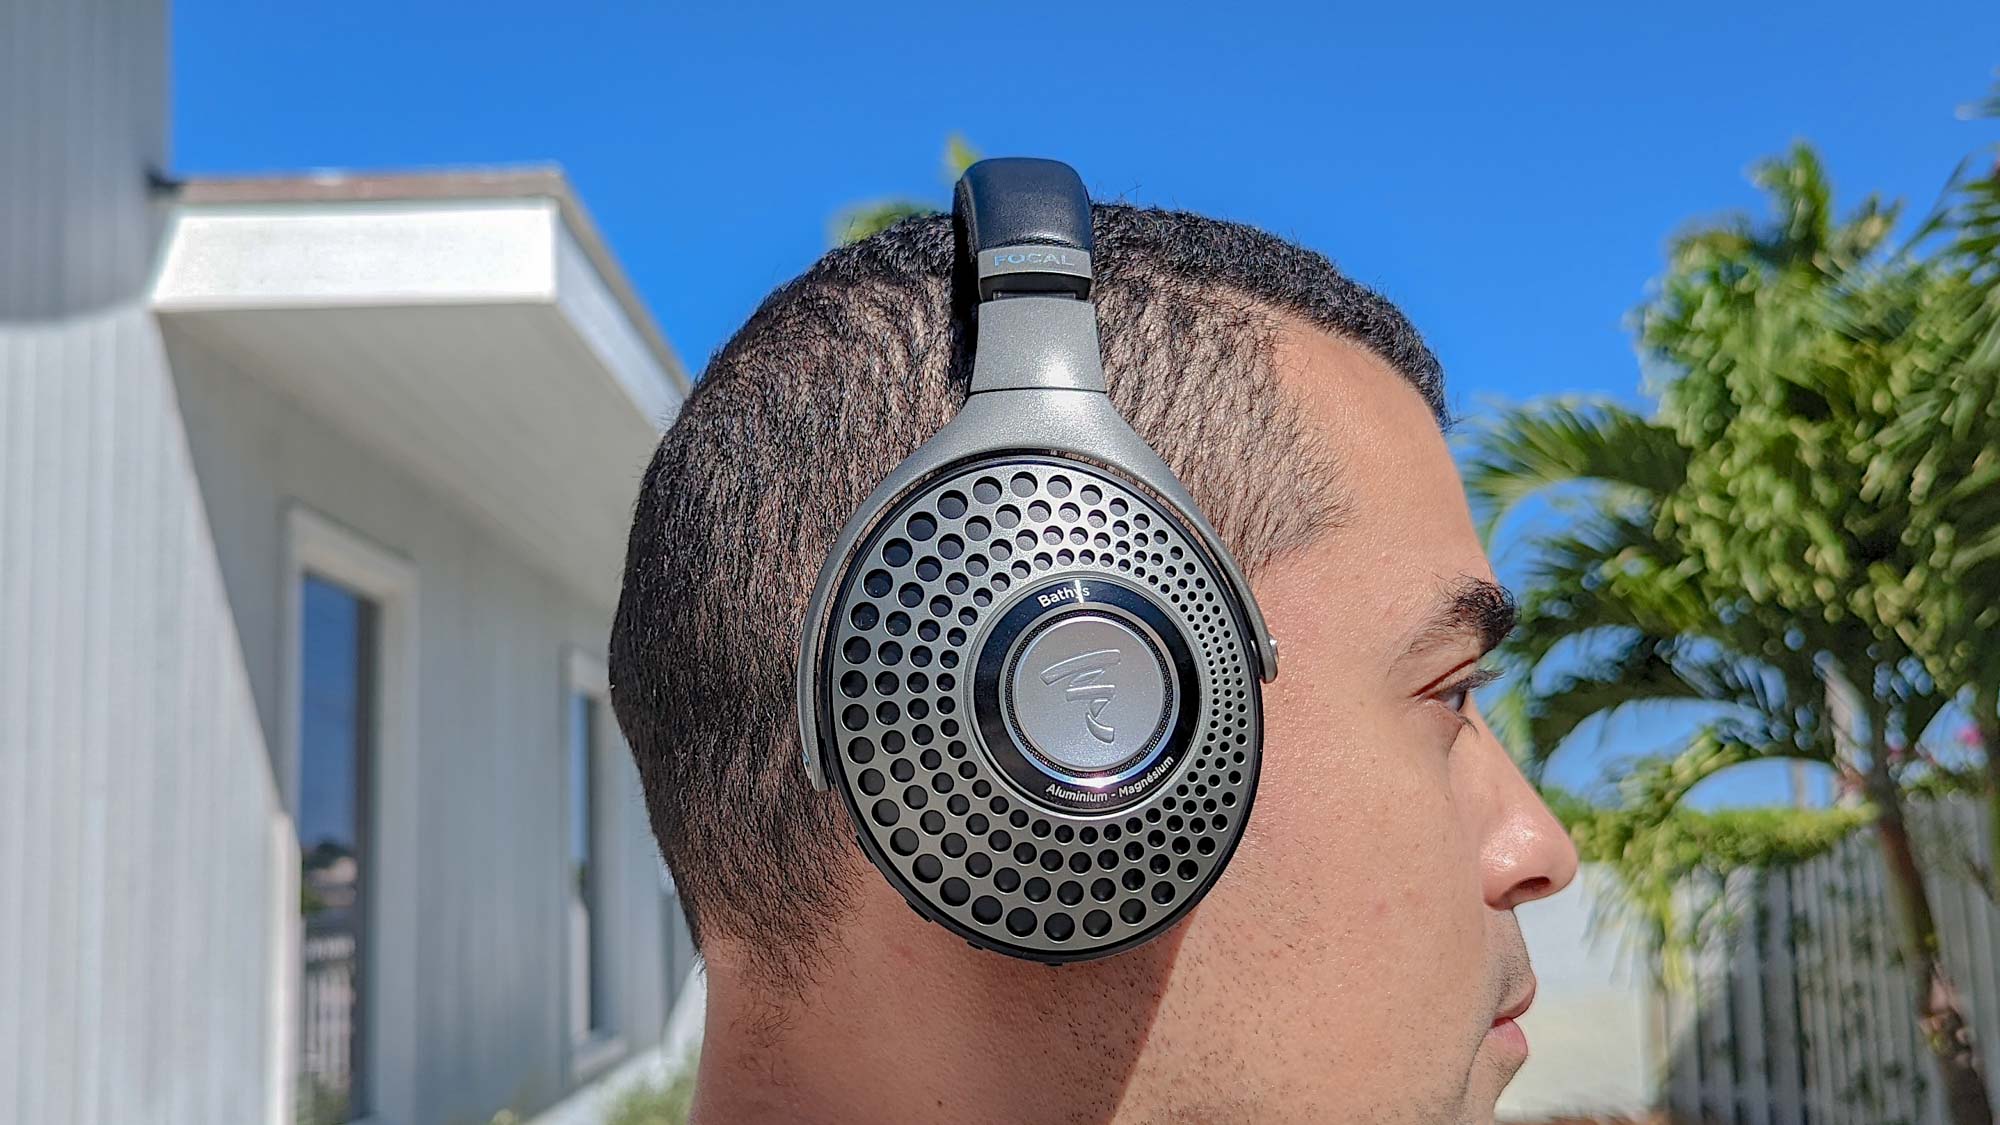 Focal Bathys as worn by reviewer to show off comfort